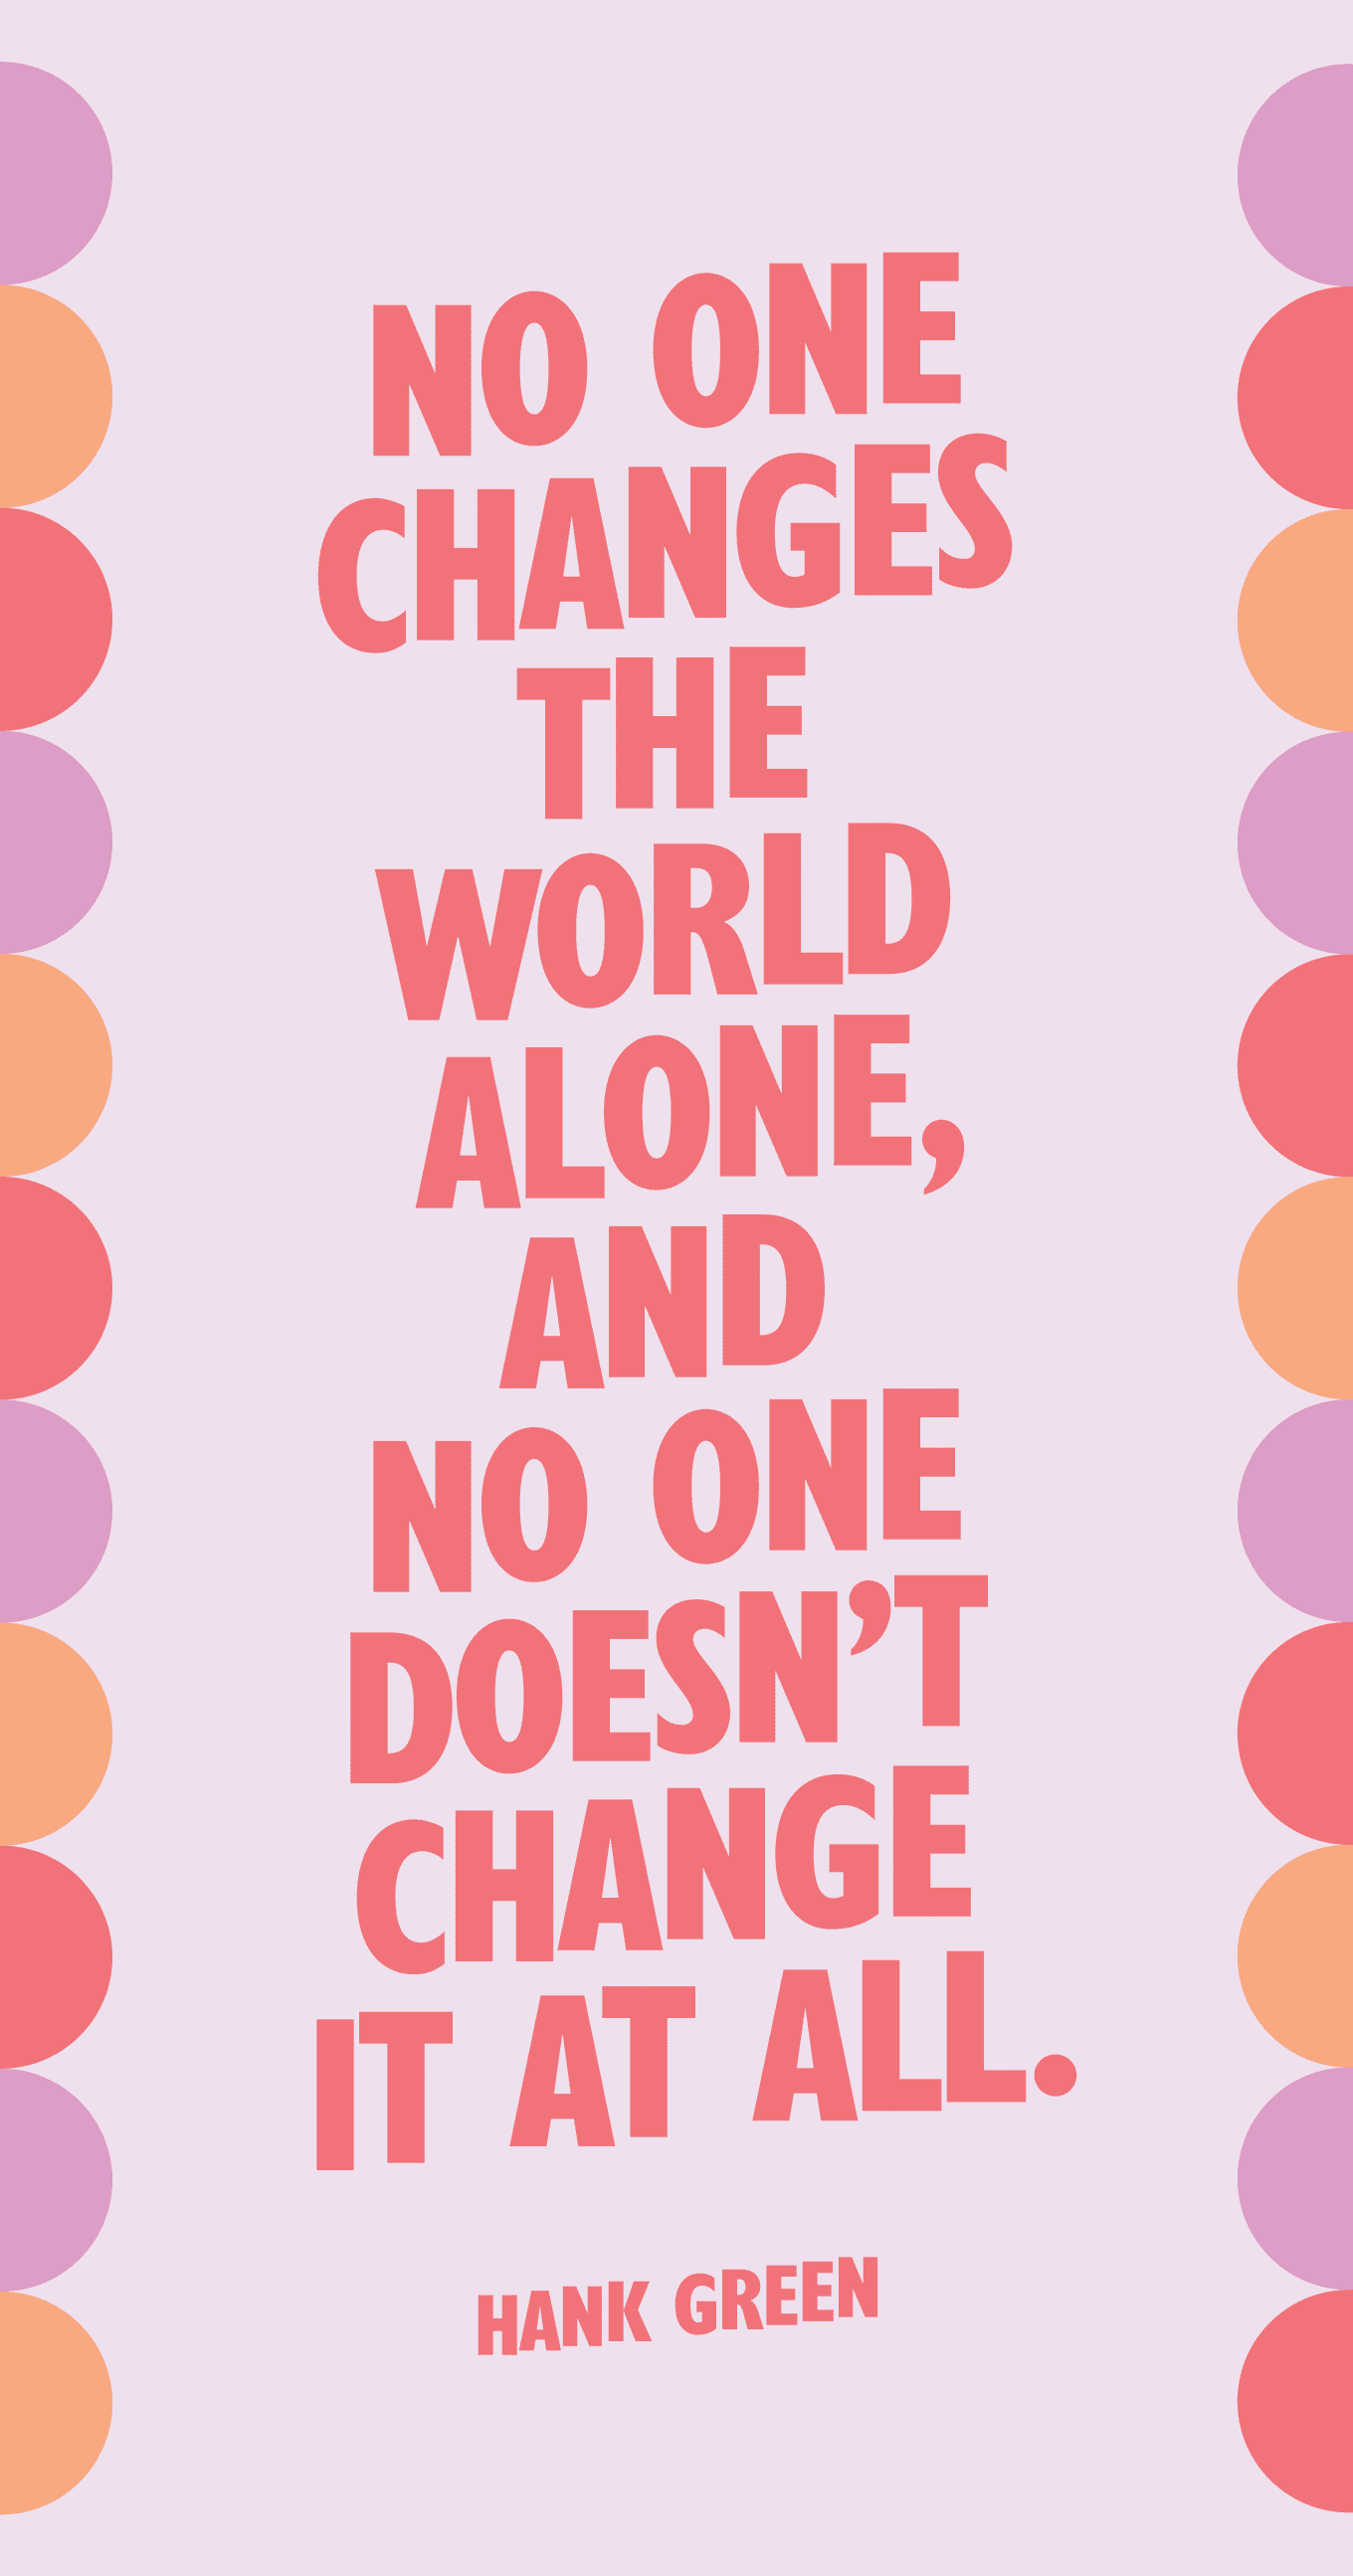 Quote Poster: No one changes the world alone and no one doesn’t change it at all. We are all exceptional, and none of us are. — Hank Green